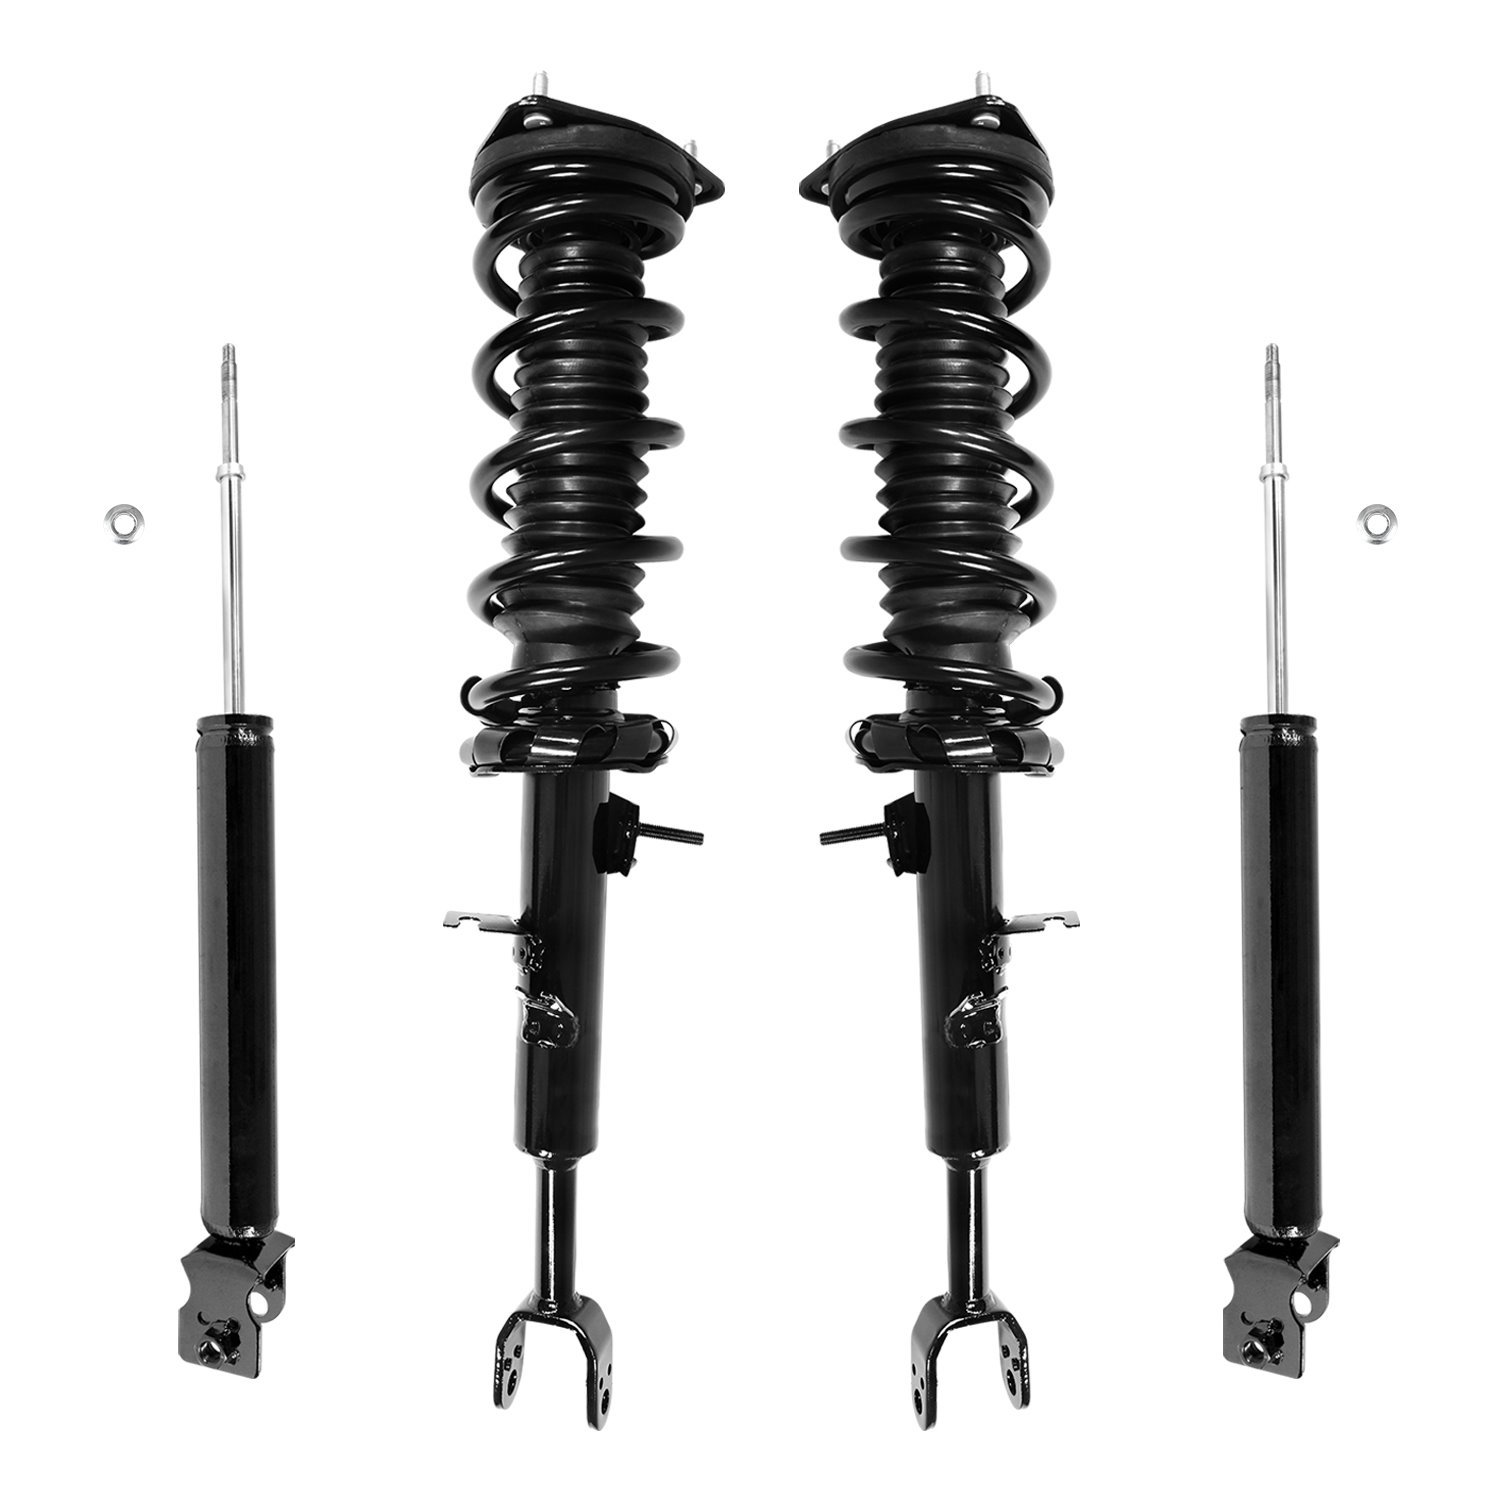 4-11393-255210-001 Front & Rear Suspension Strut & Coil Spring Assembly Fits Select Nissan 350Z, Infiniti G35